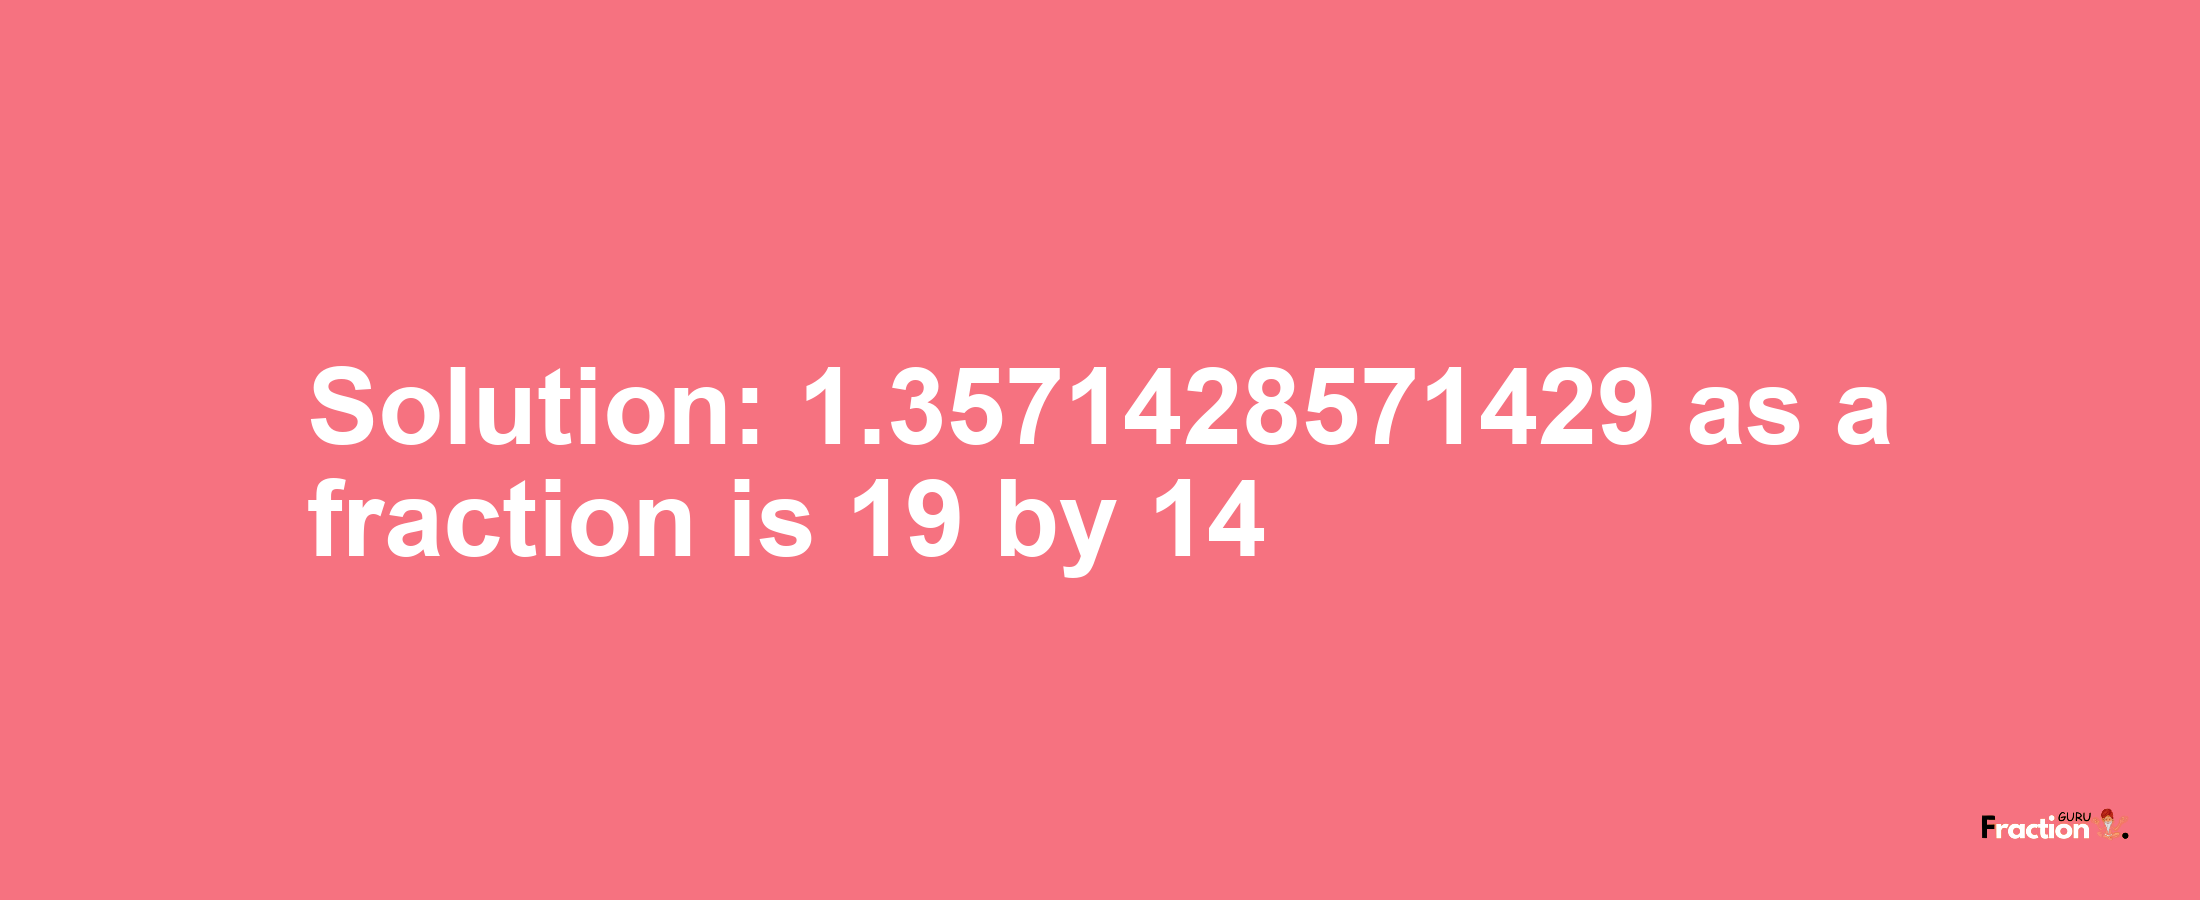 Solution:1.3571428571429 as a fraction is 19/14